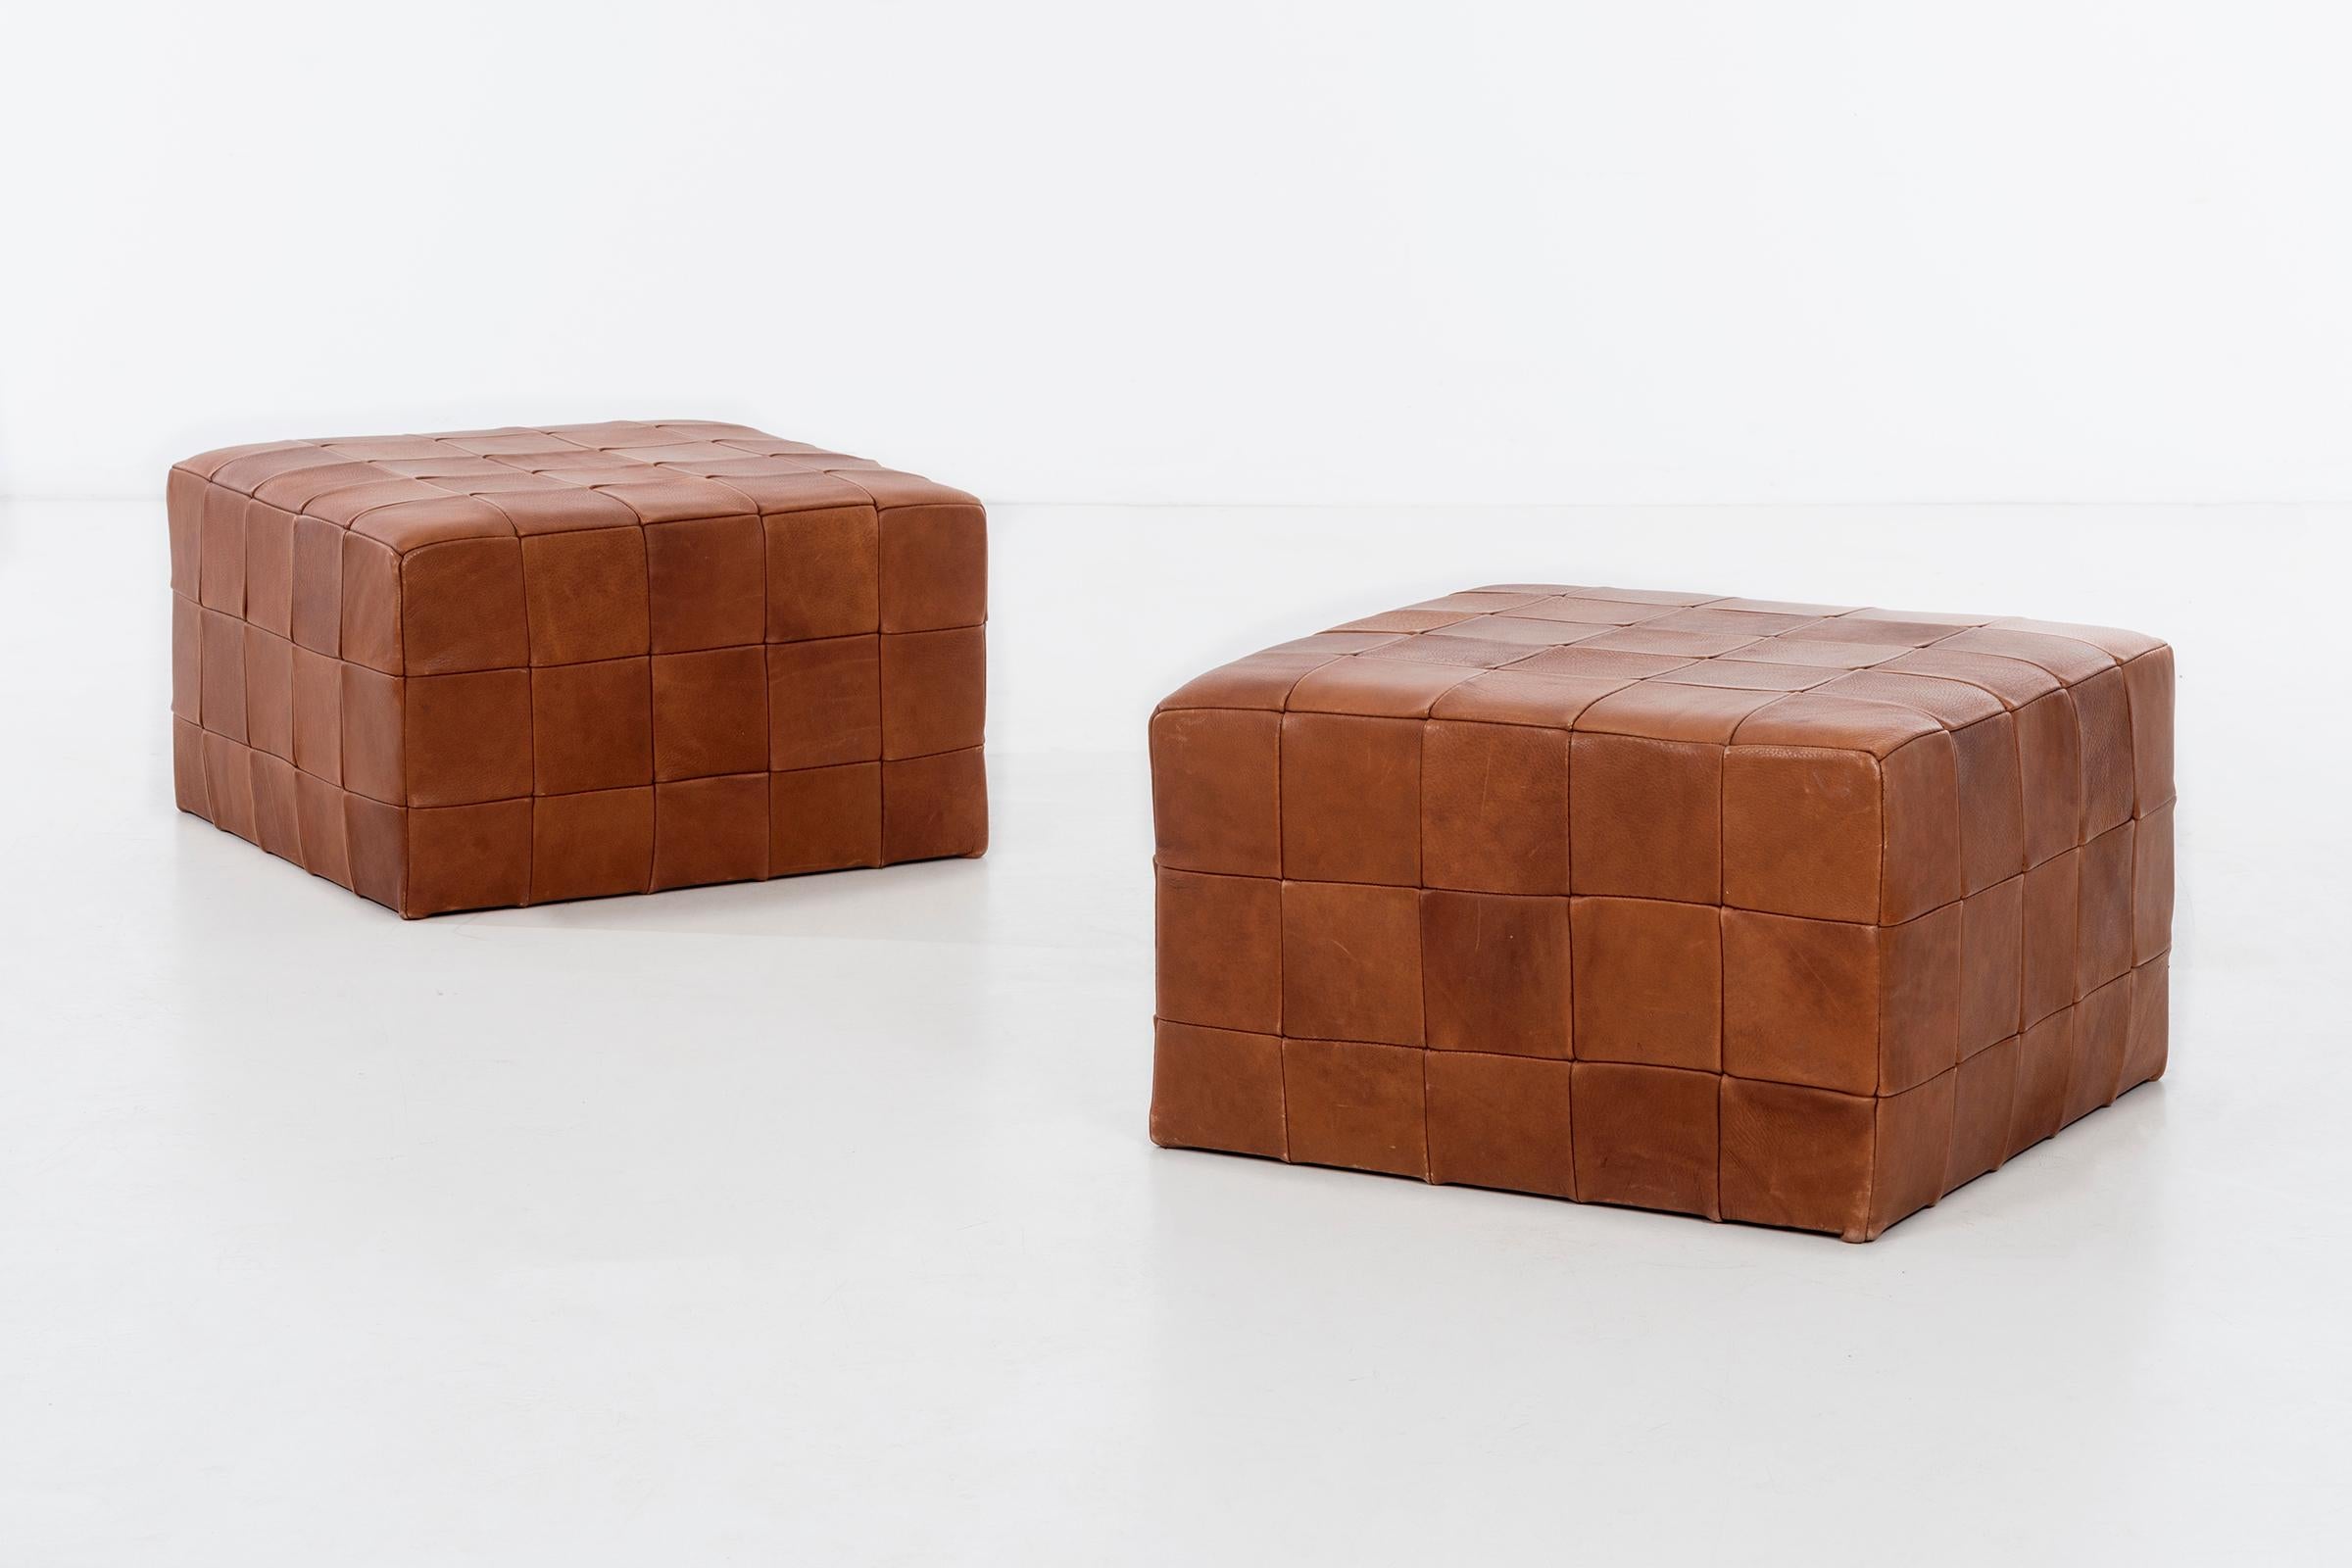 Pair of vegetable dye leather patchwork stools/ ottomans.
 